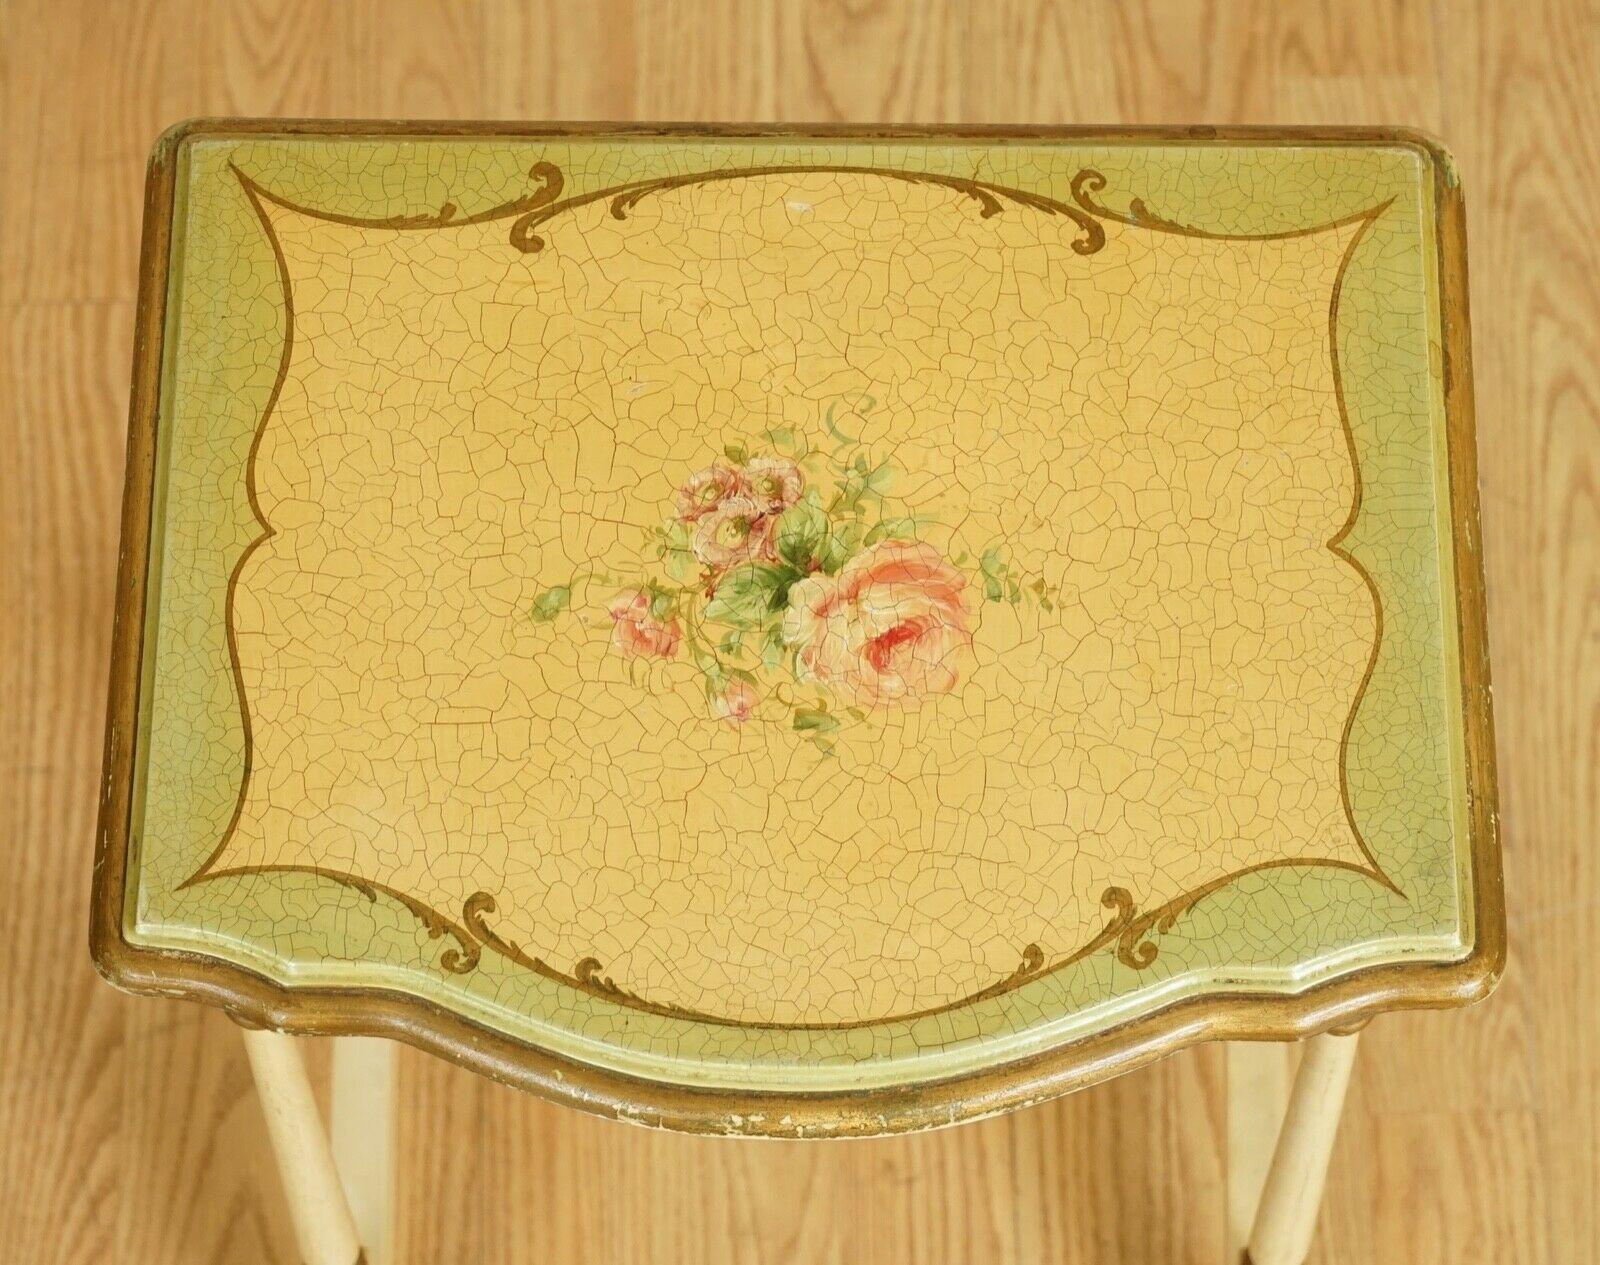 Vintage French Hand Painted Floral Nest of Tables For Sale 4